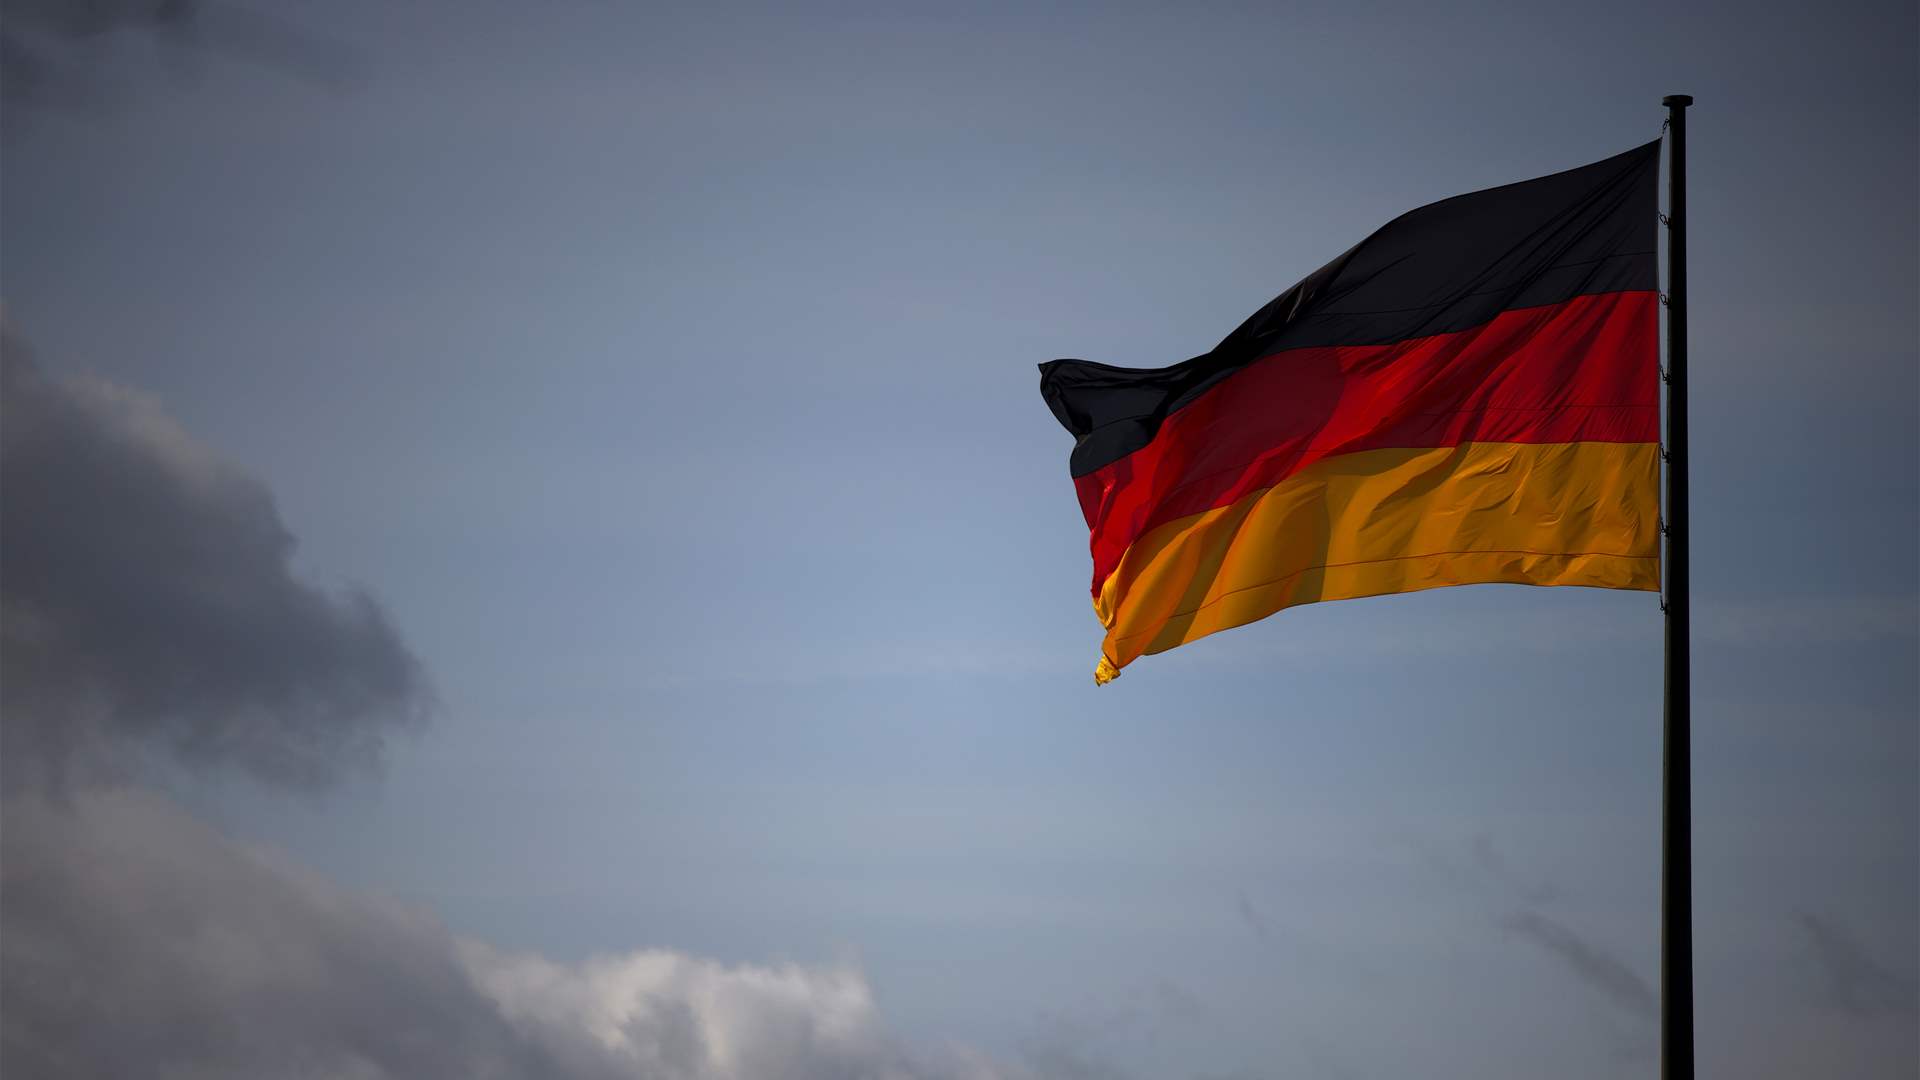 Germany is ‘wasting time’ in the decision to deliver the missiles